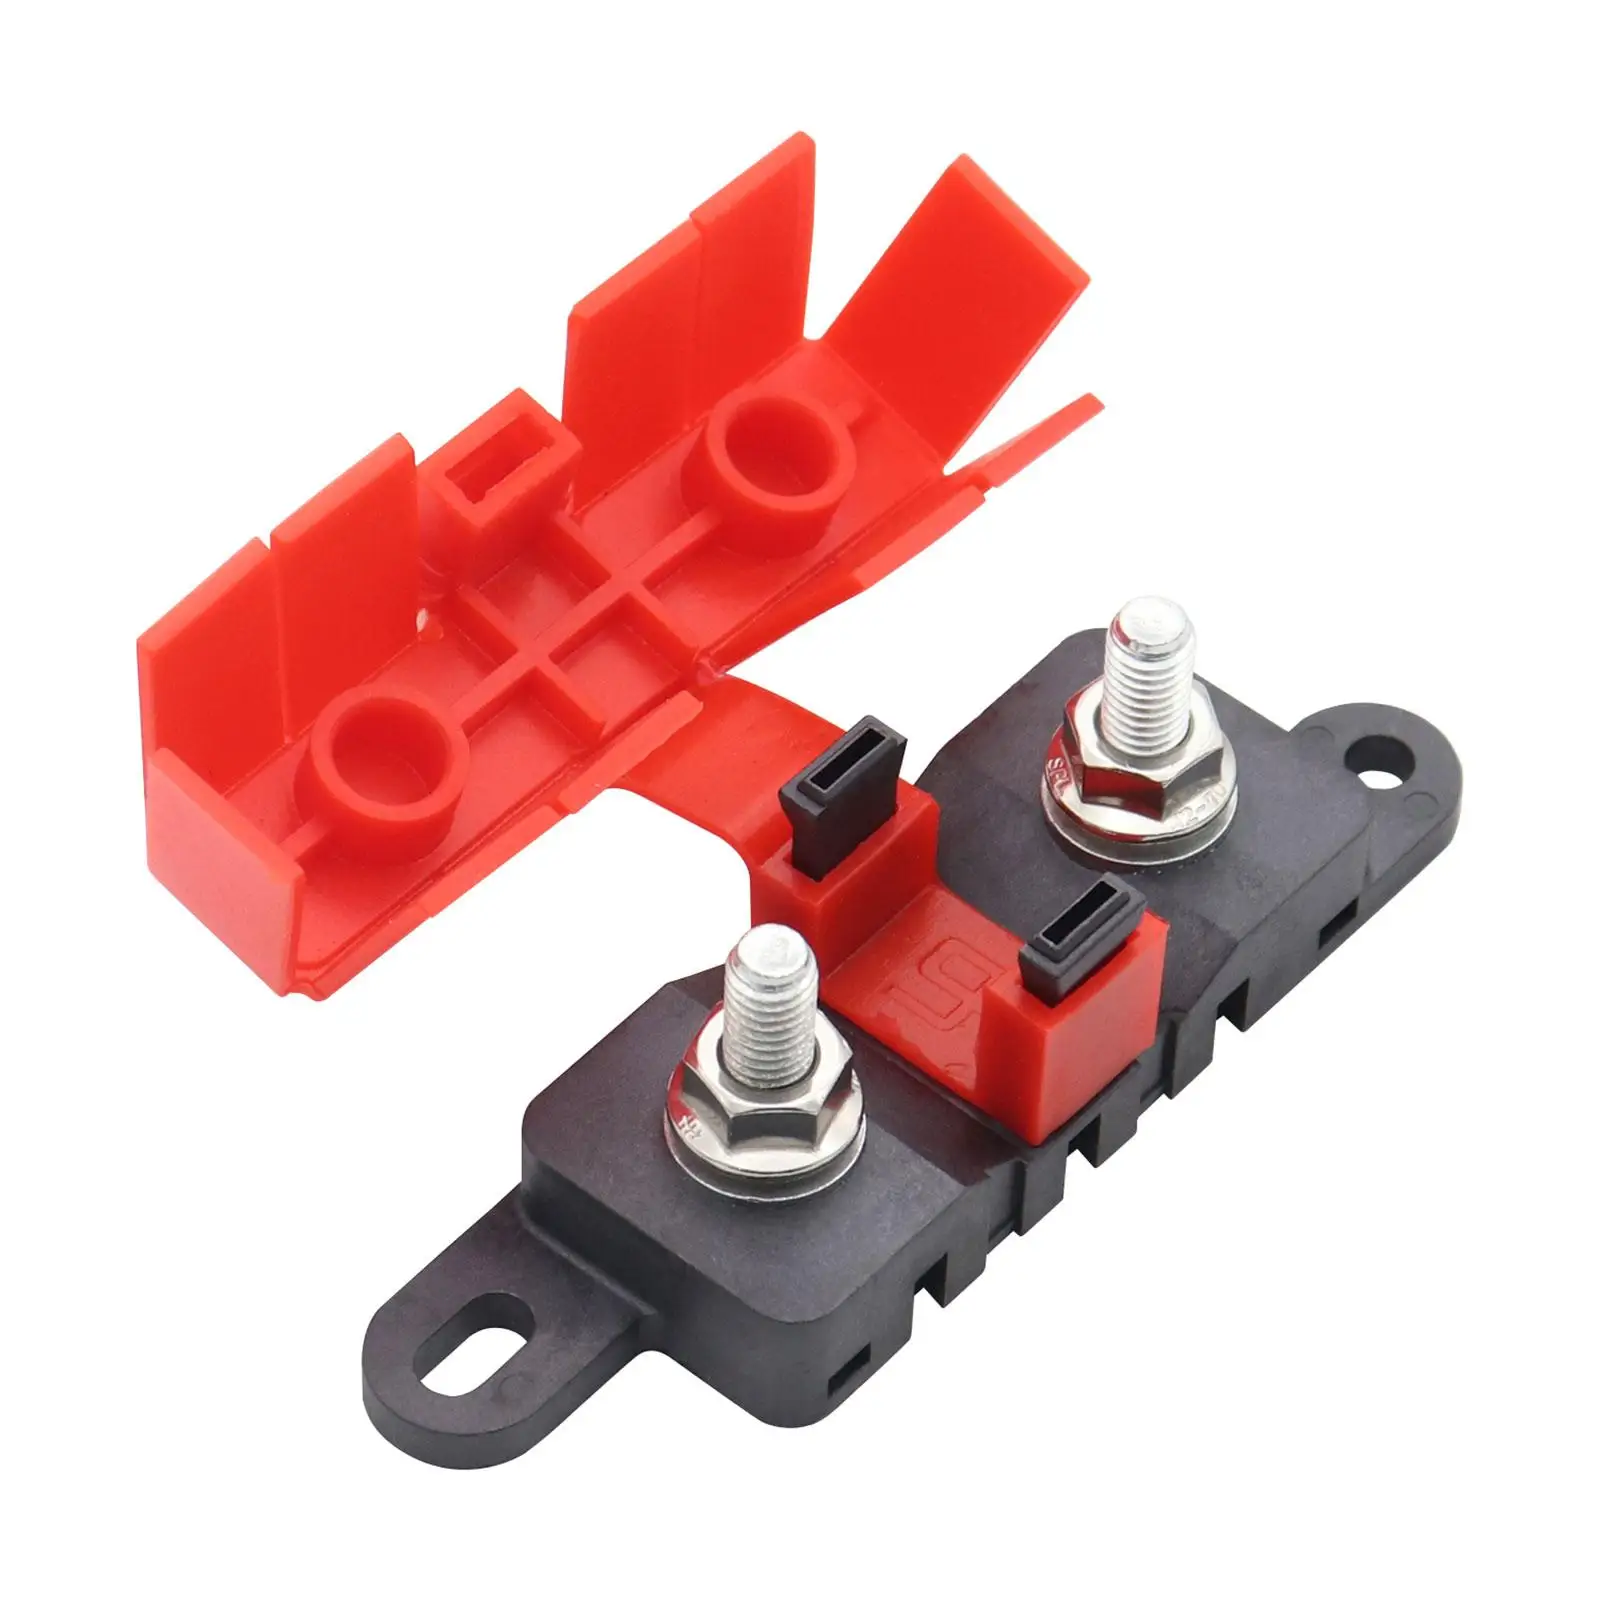 Fuse Box Double Head Bolts 500A 70V with Protective Cover Auto Fuses Holder for Yacht Automotive RV Marine Boat Motorhome